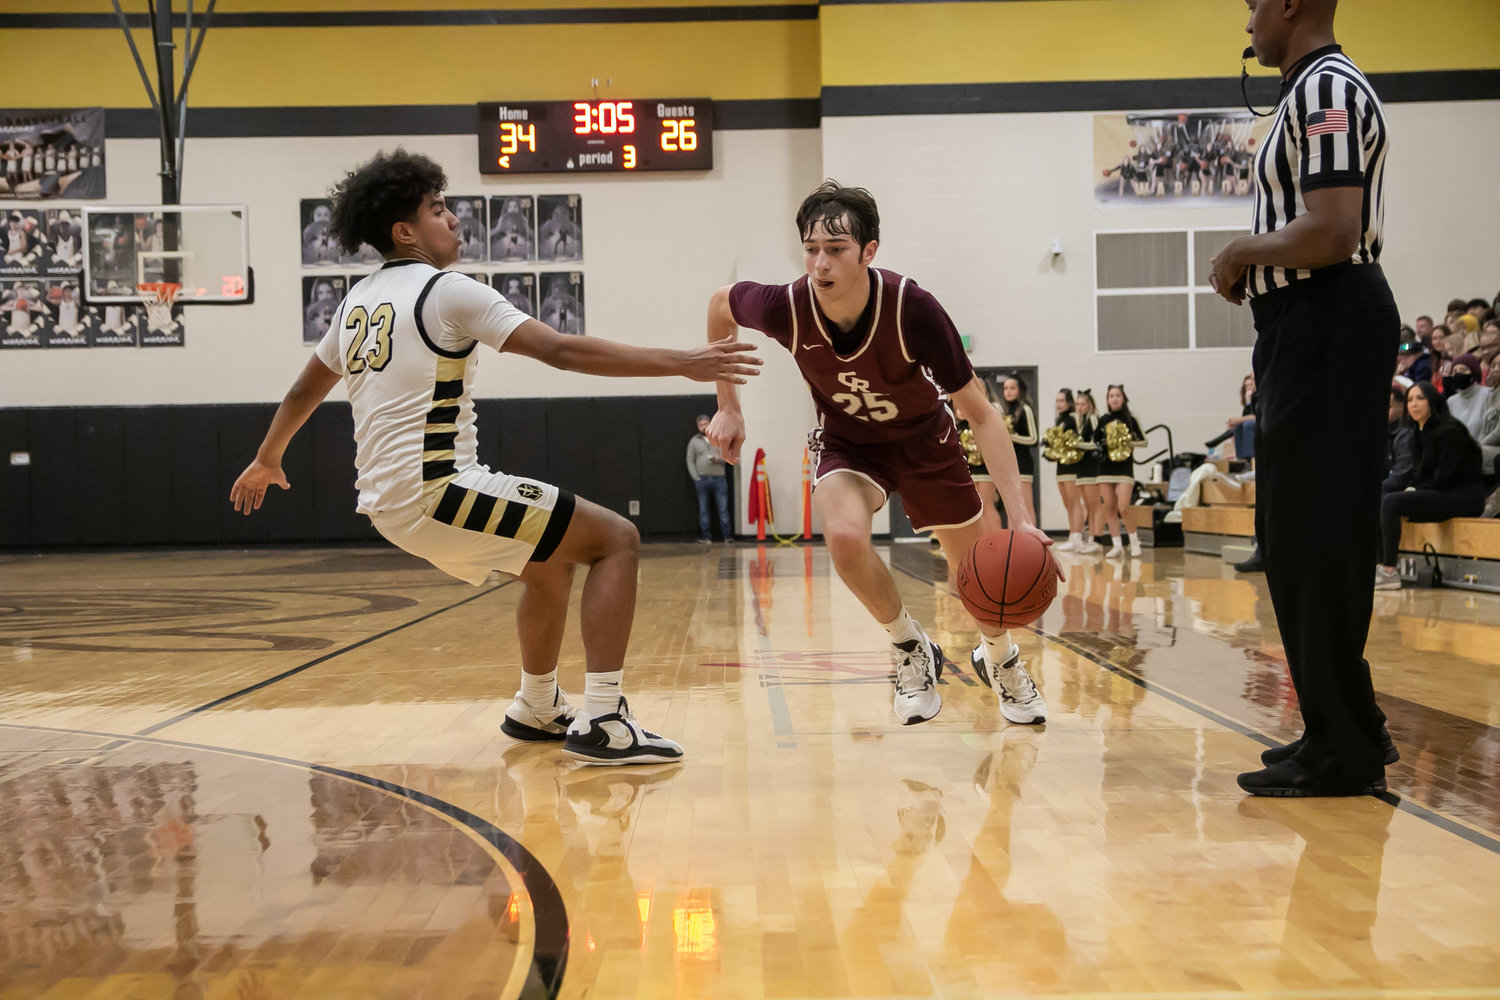 Josh Lennon drives past a defender during Tuesday's game between Cinco Ranch and Jordan at the Jordan gym.